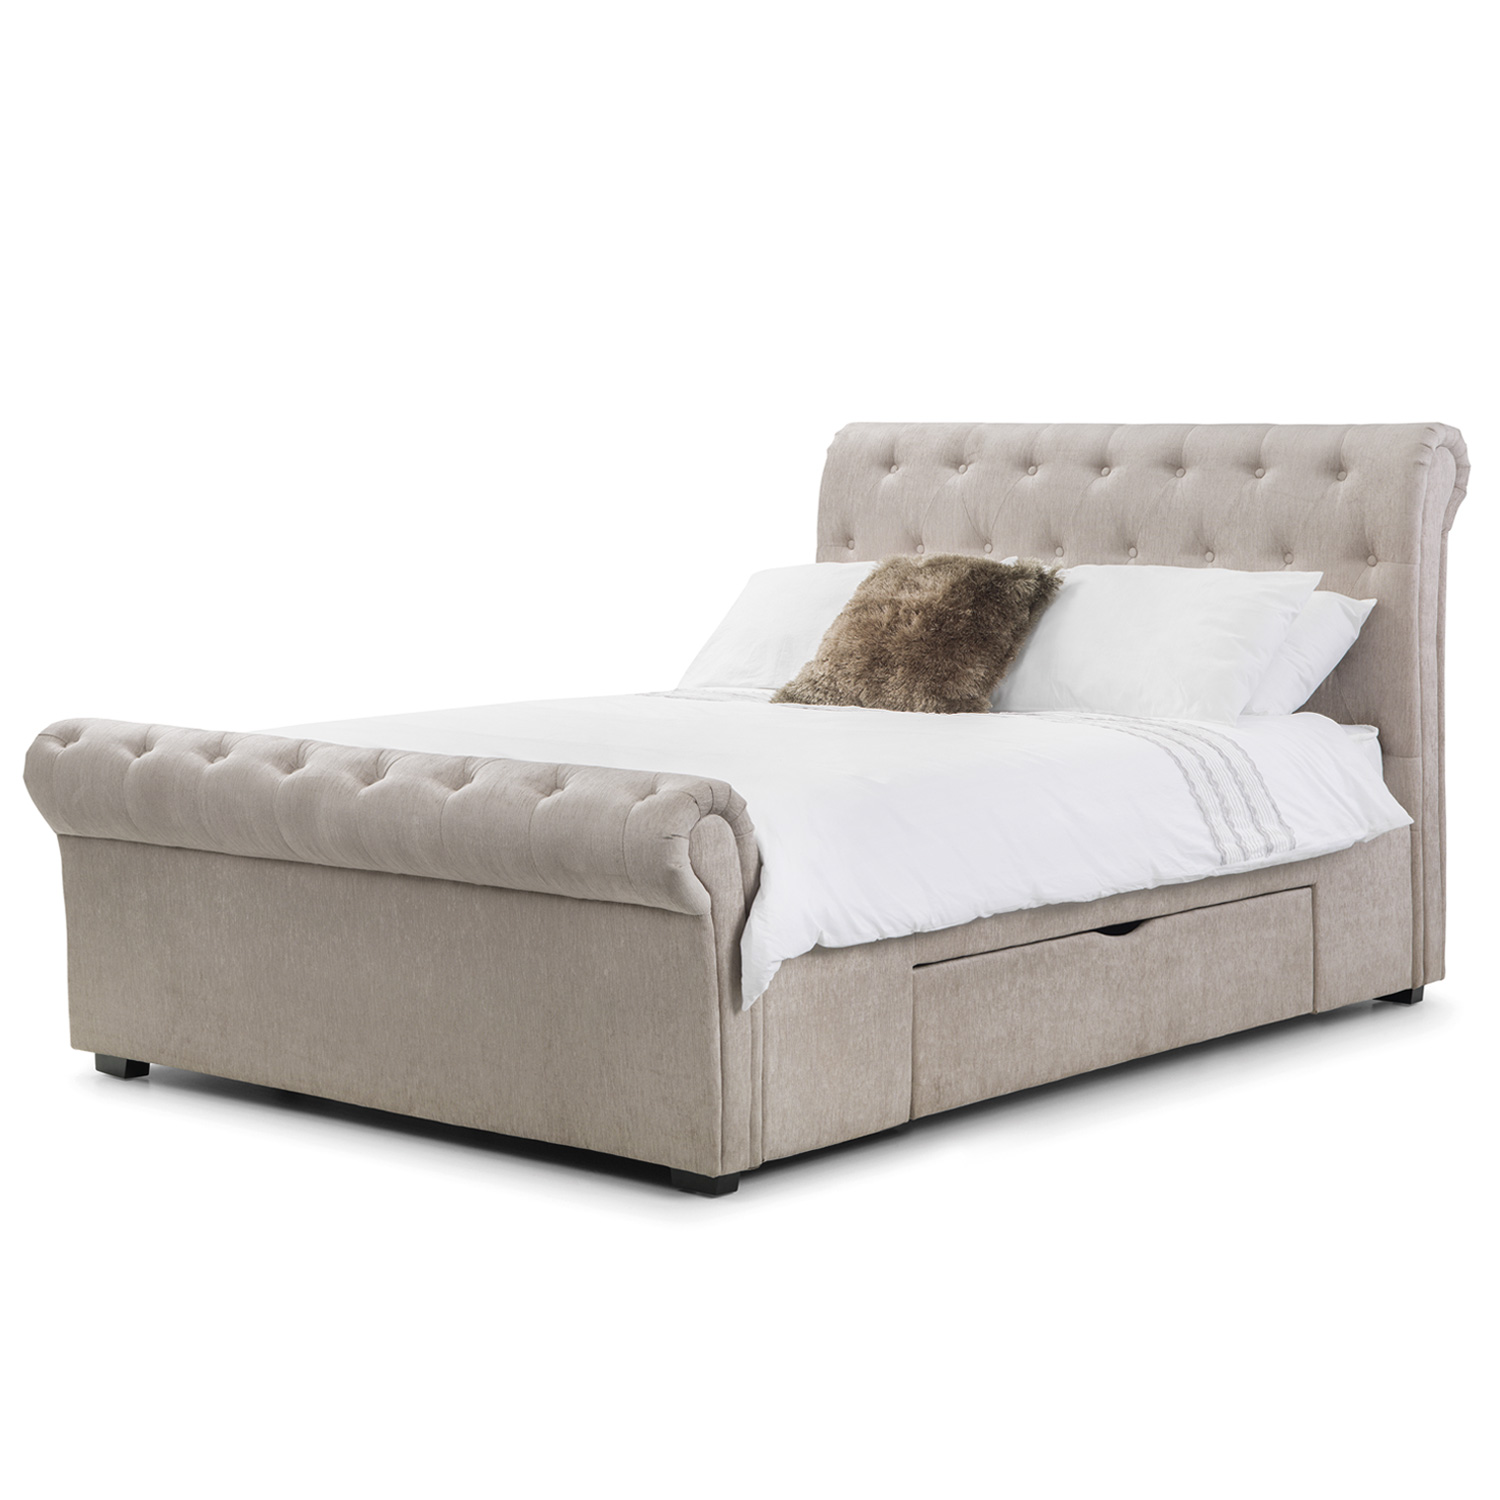 Ramona Fabric Bed Frame Beds, Fabric Bed Frame King With Storage